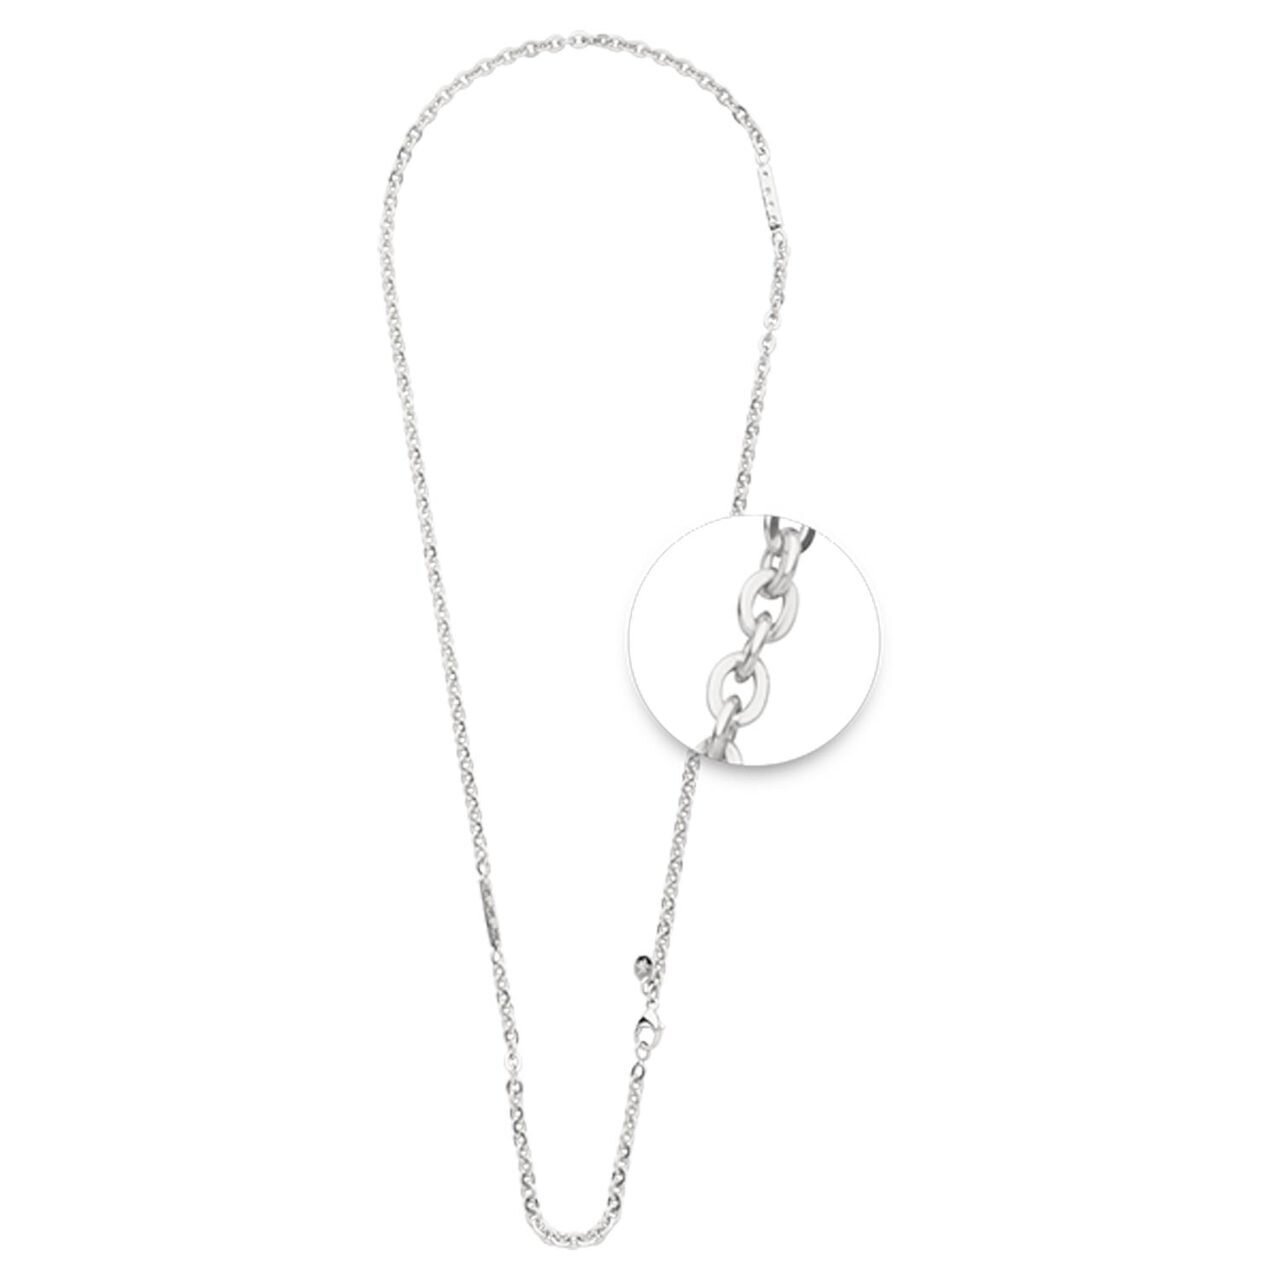 Nikki Lissoni Flattened Cable Chain 4 x 5mm with Statements Silver-plated 60cm N1027S60